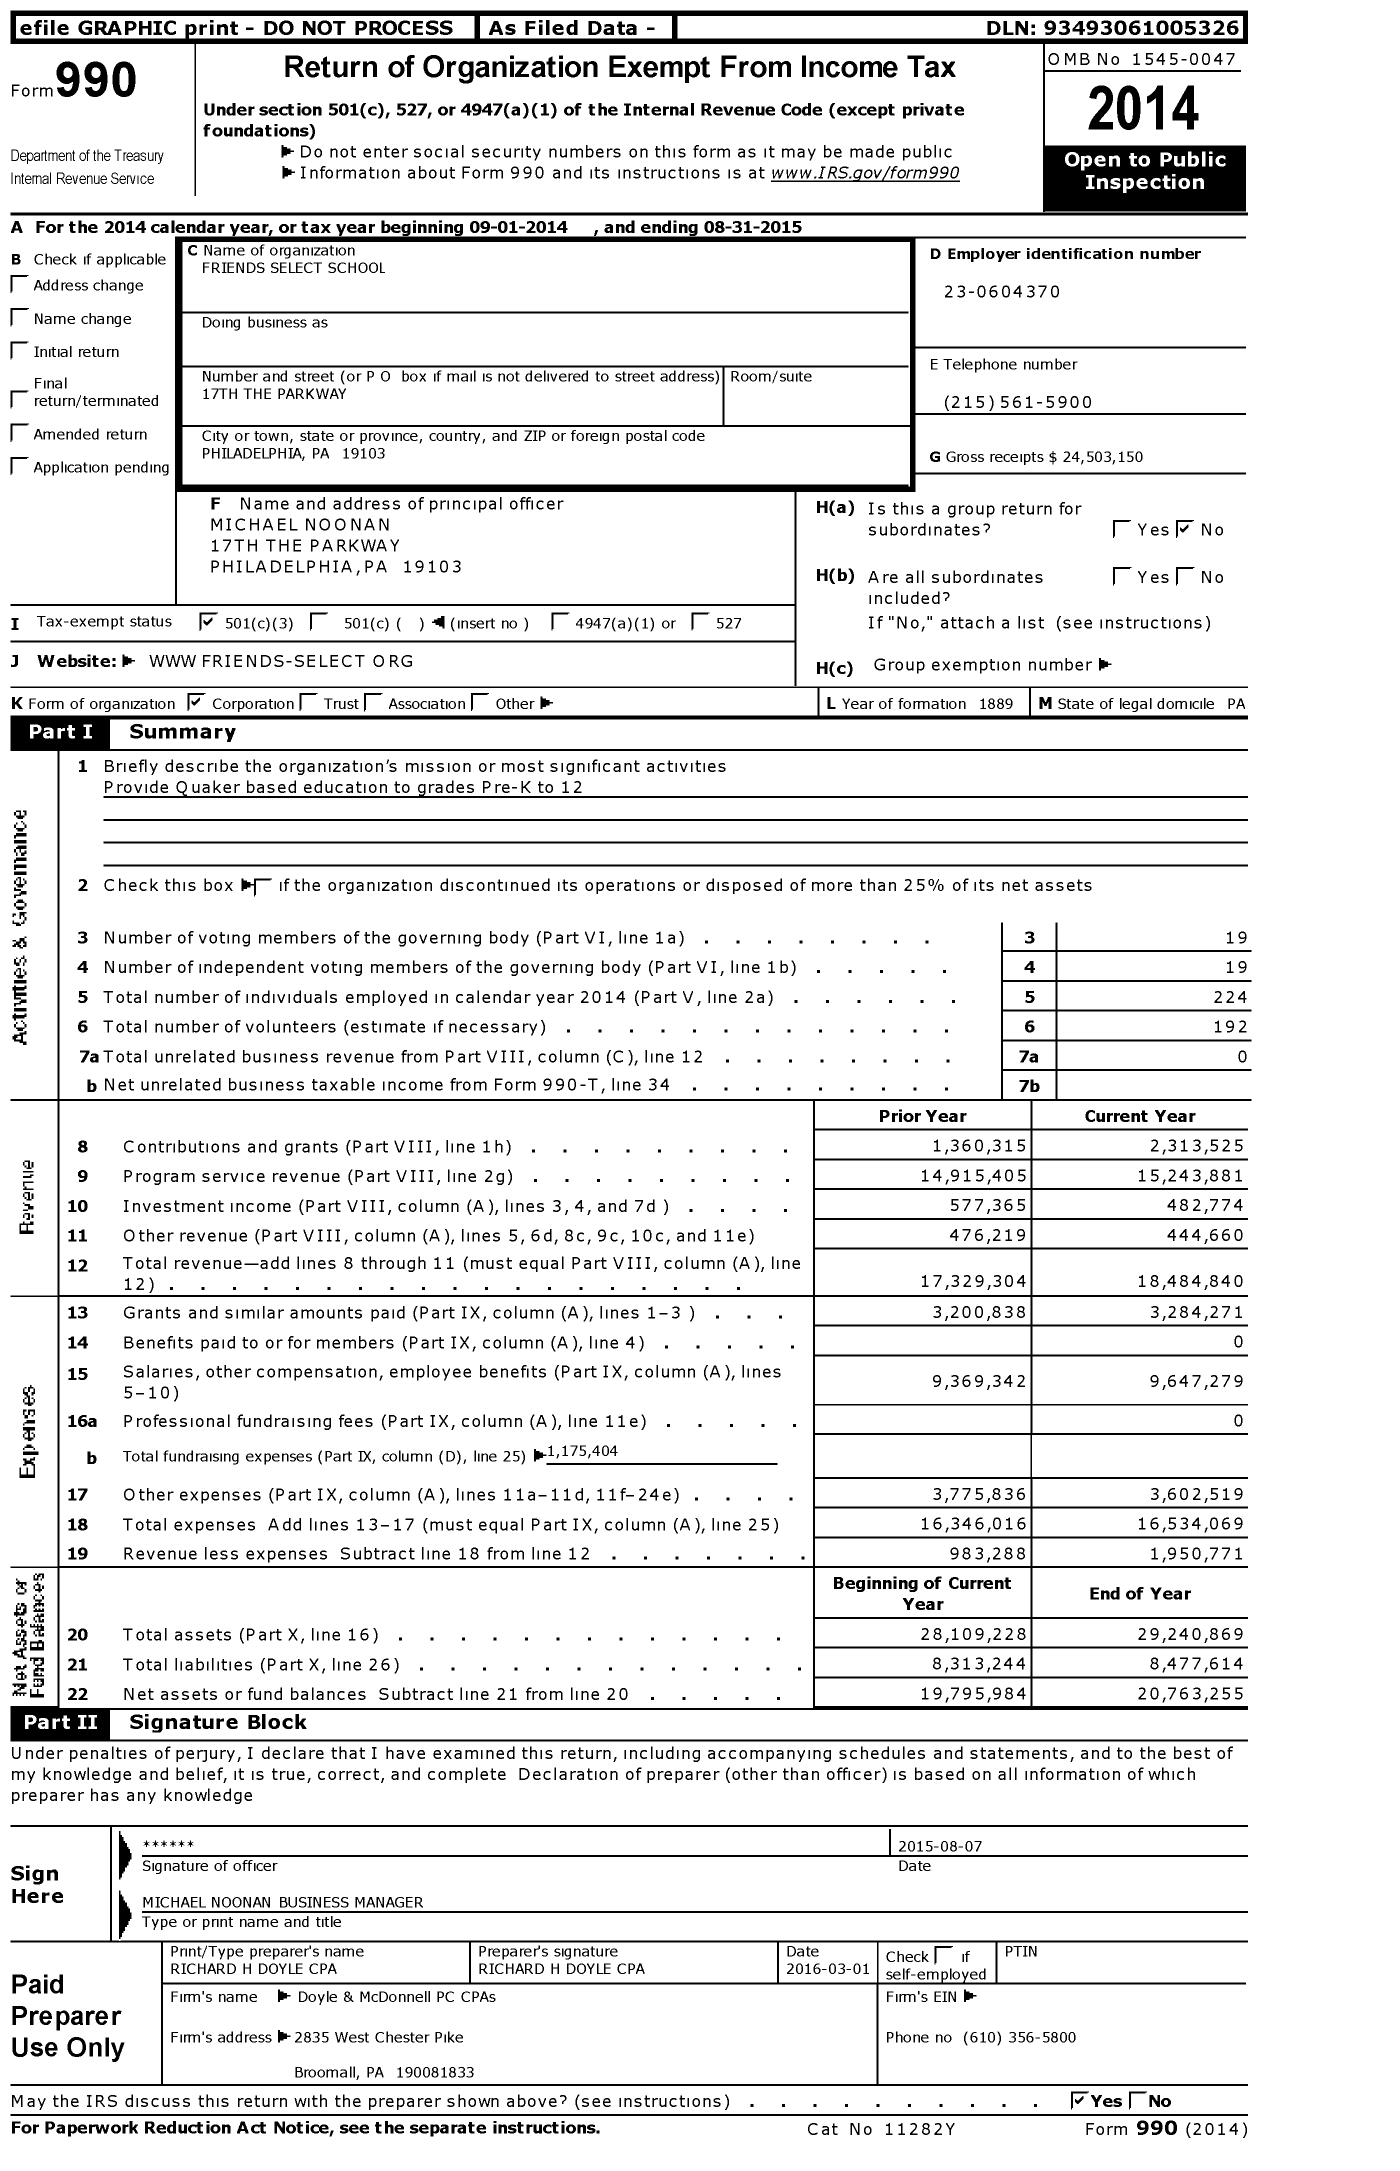 Image of first page of 2014 Form 990 for Friends Select School (FSS)